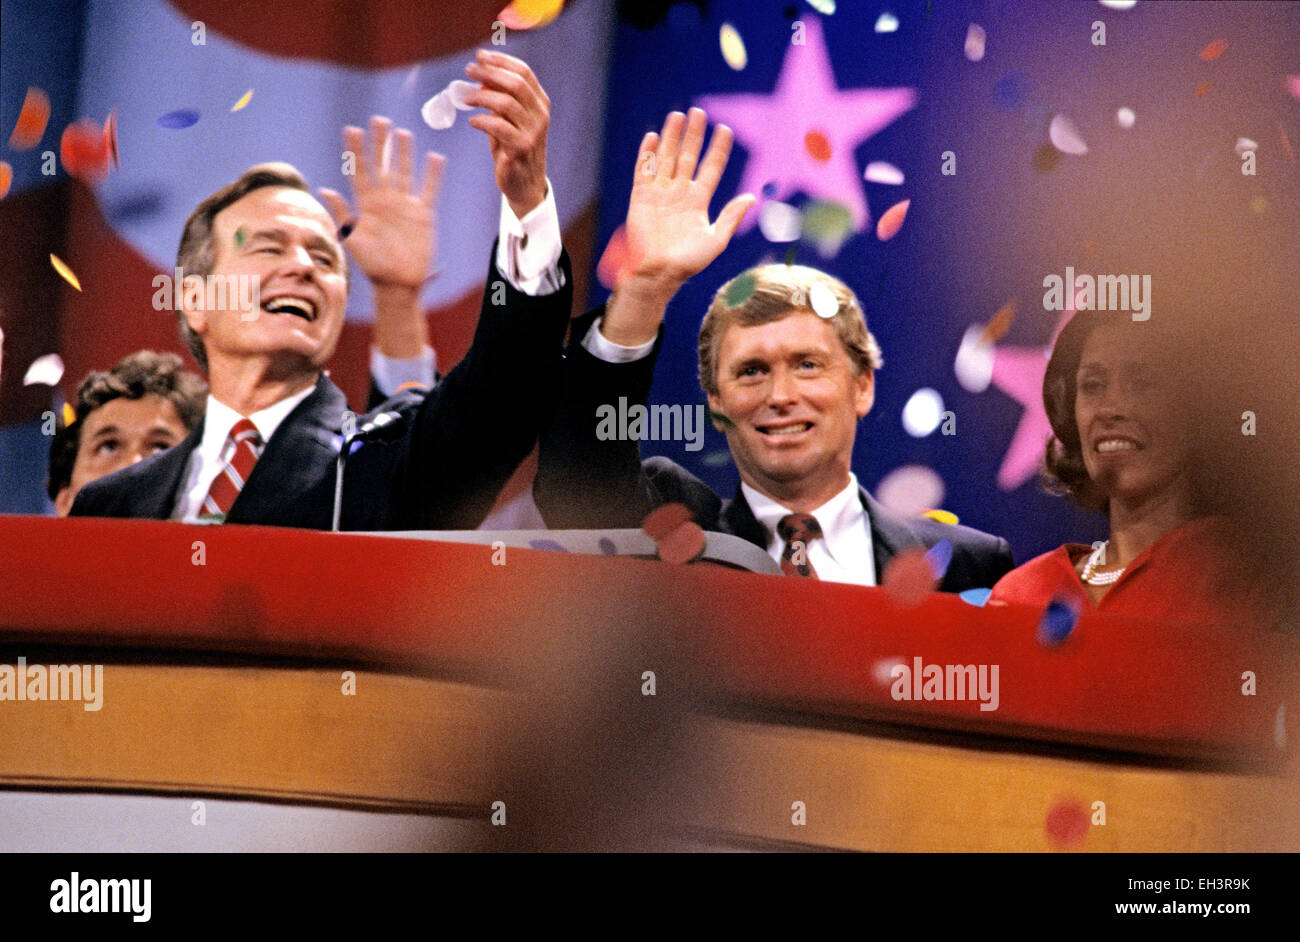 United States Vice President George H.W. Bush, left, and U.S. Senator Dan Quayle (Republican of Indiana), center, on the podium after delivering their speeches accepting their party's nomination for President and Vice President of the United States respectively at the 1988 Republican Convention at the Super Dome in New Orleans, Louisiana on August 18, 1988. At right is Marilyn Quayle. Credit: Howard L. Sachs/CNP - NO WIRE SERVICE - Stock Photo